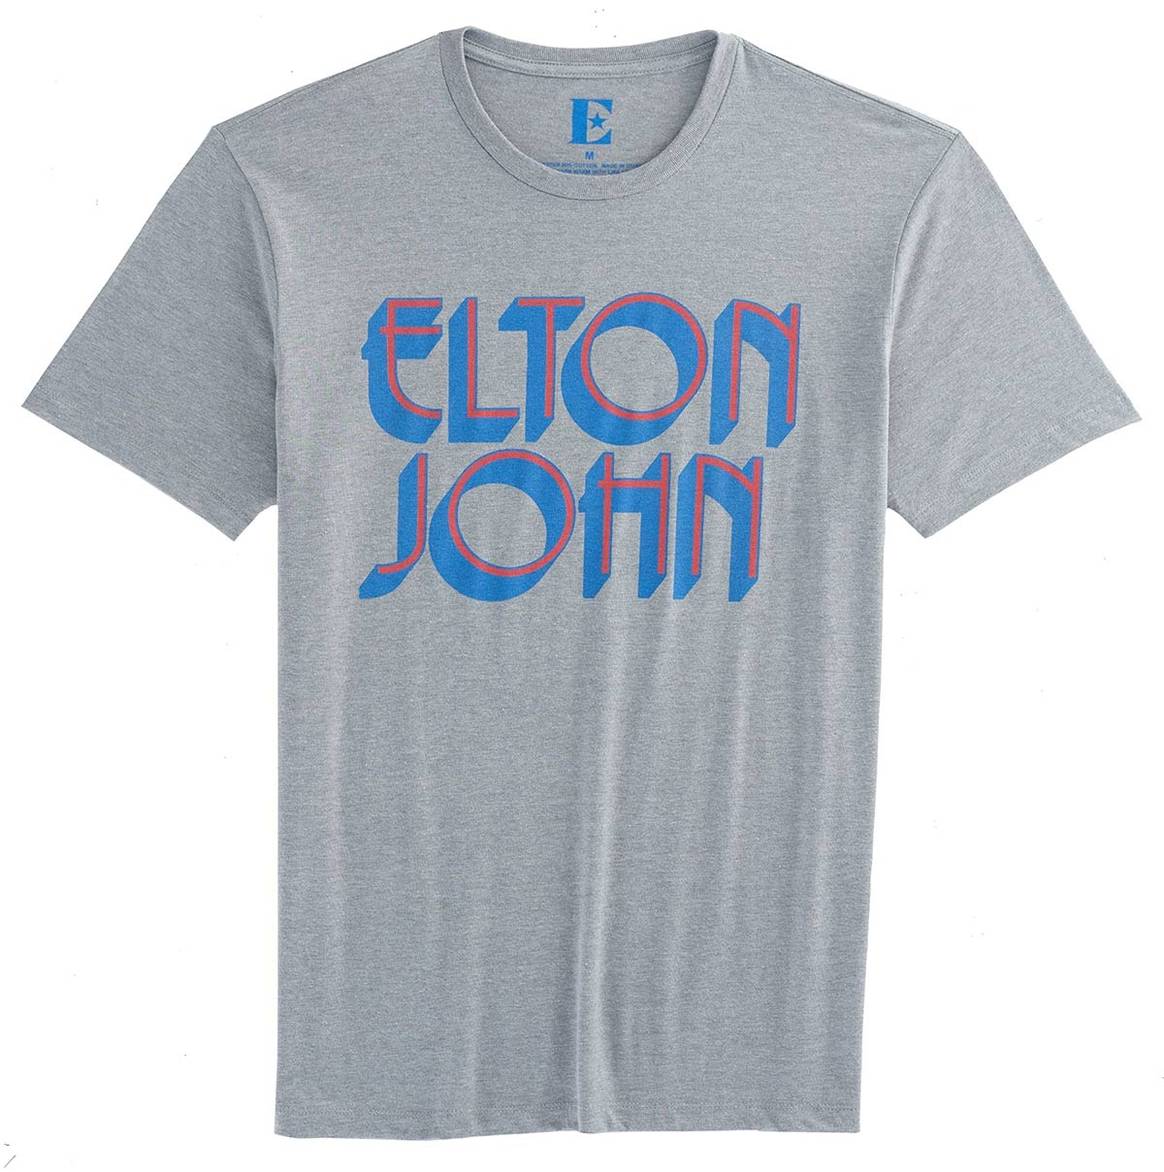 Lucky Brand launches Elton John capsule collection